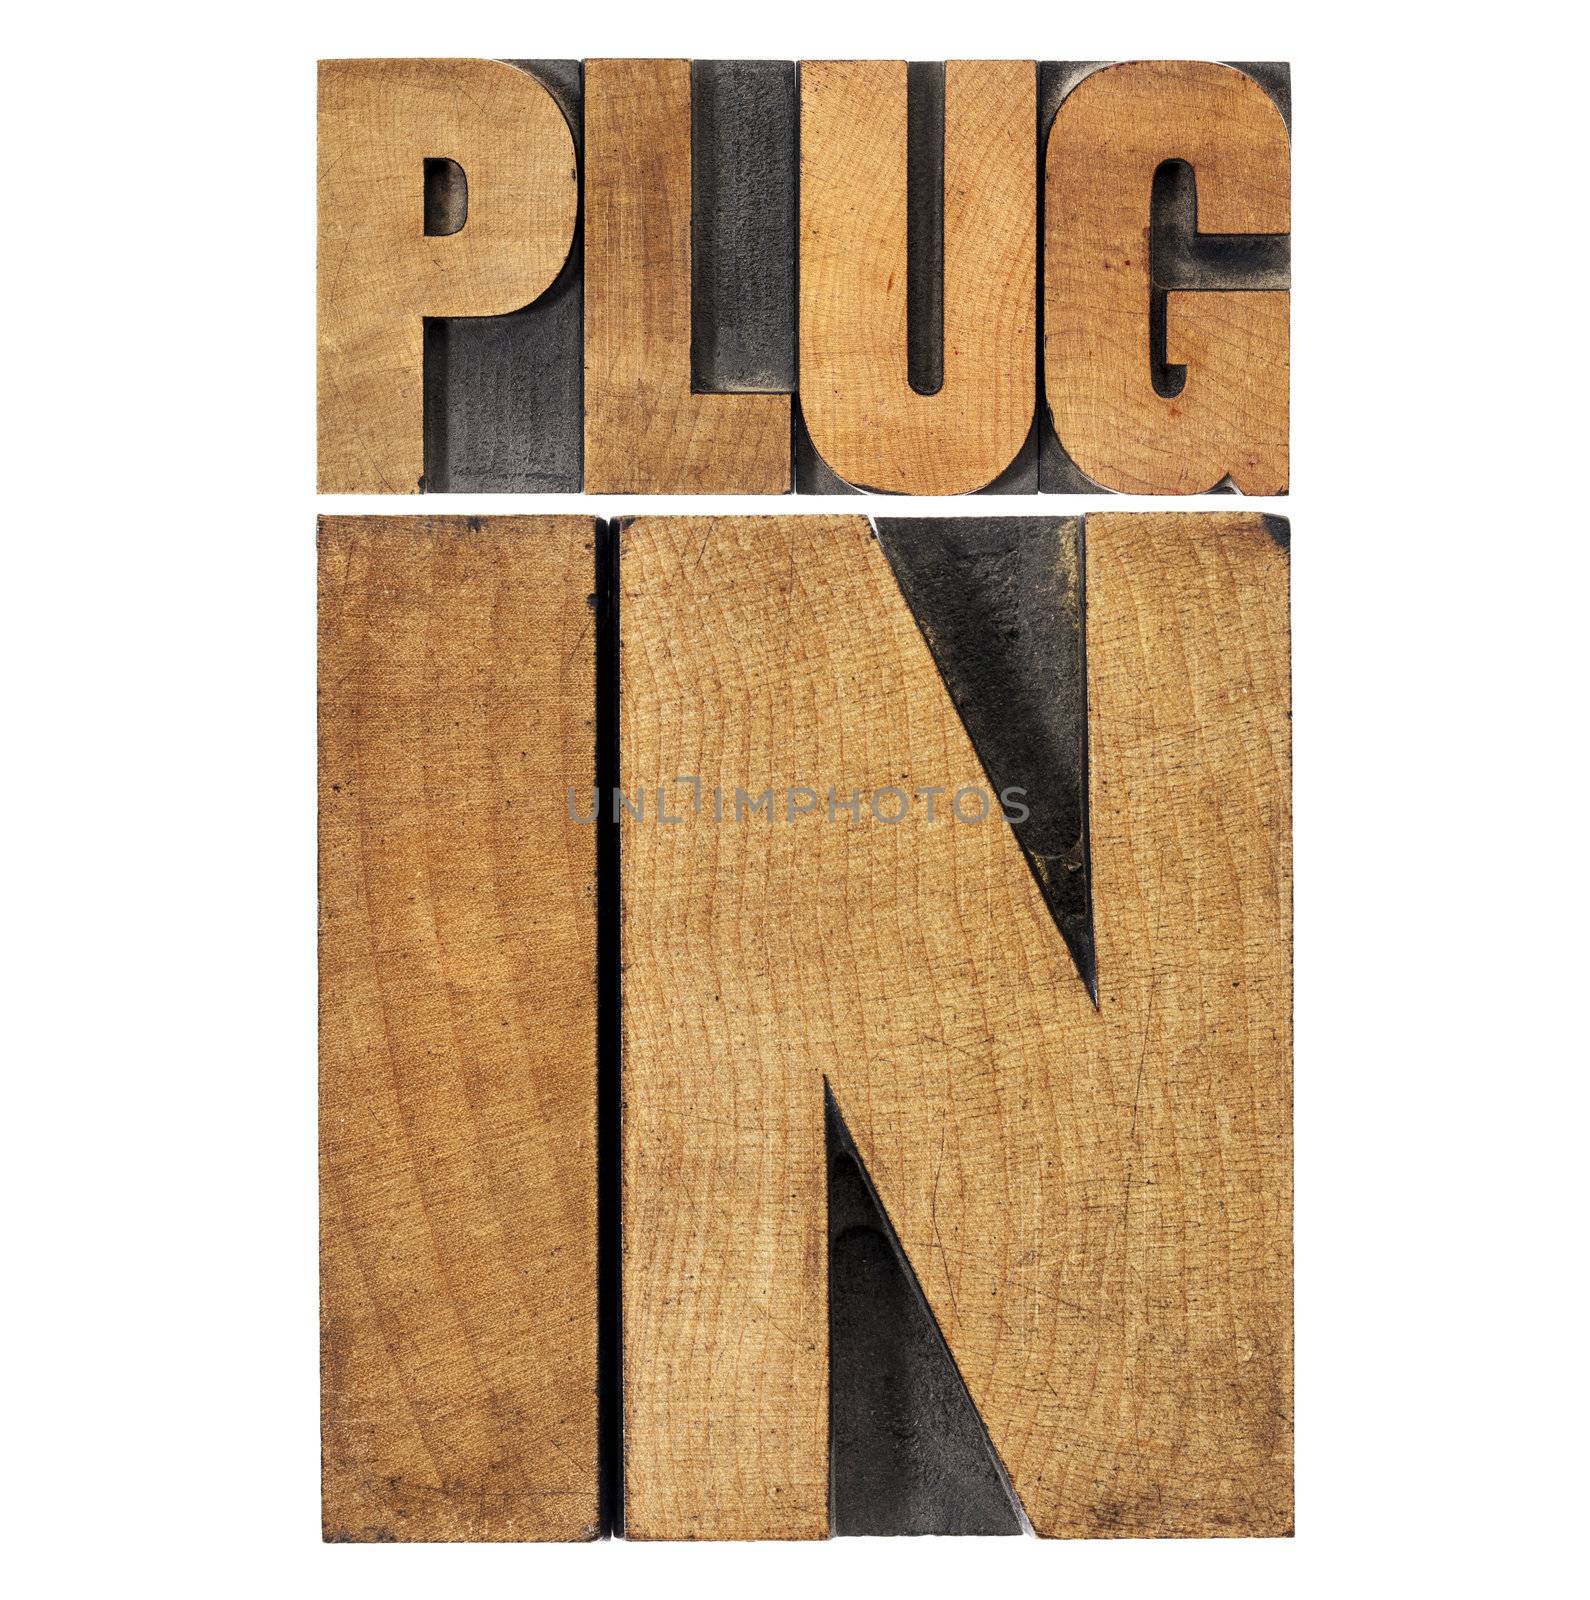 plugin (plug-in)  - computer software component or application - isolated text in vintage letterpress wood type printing blocks